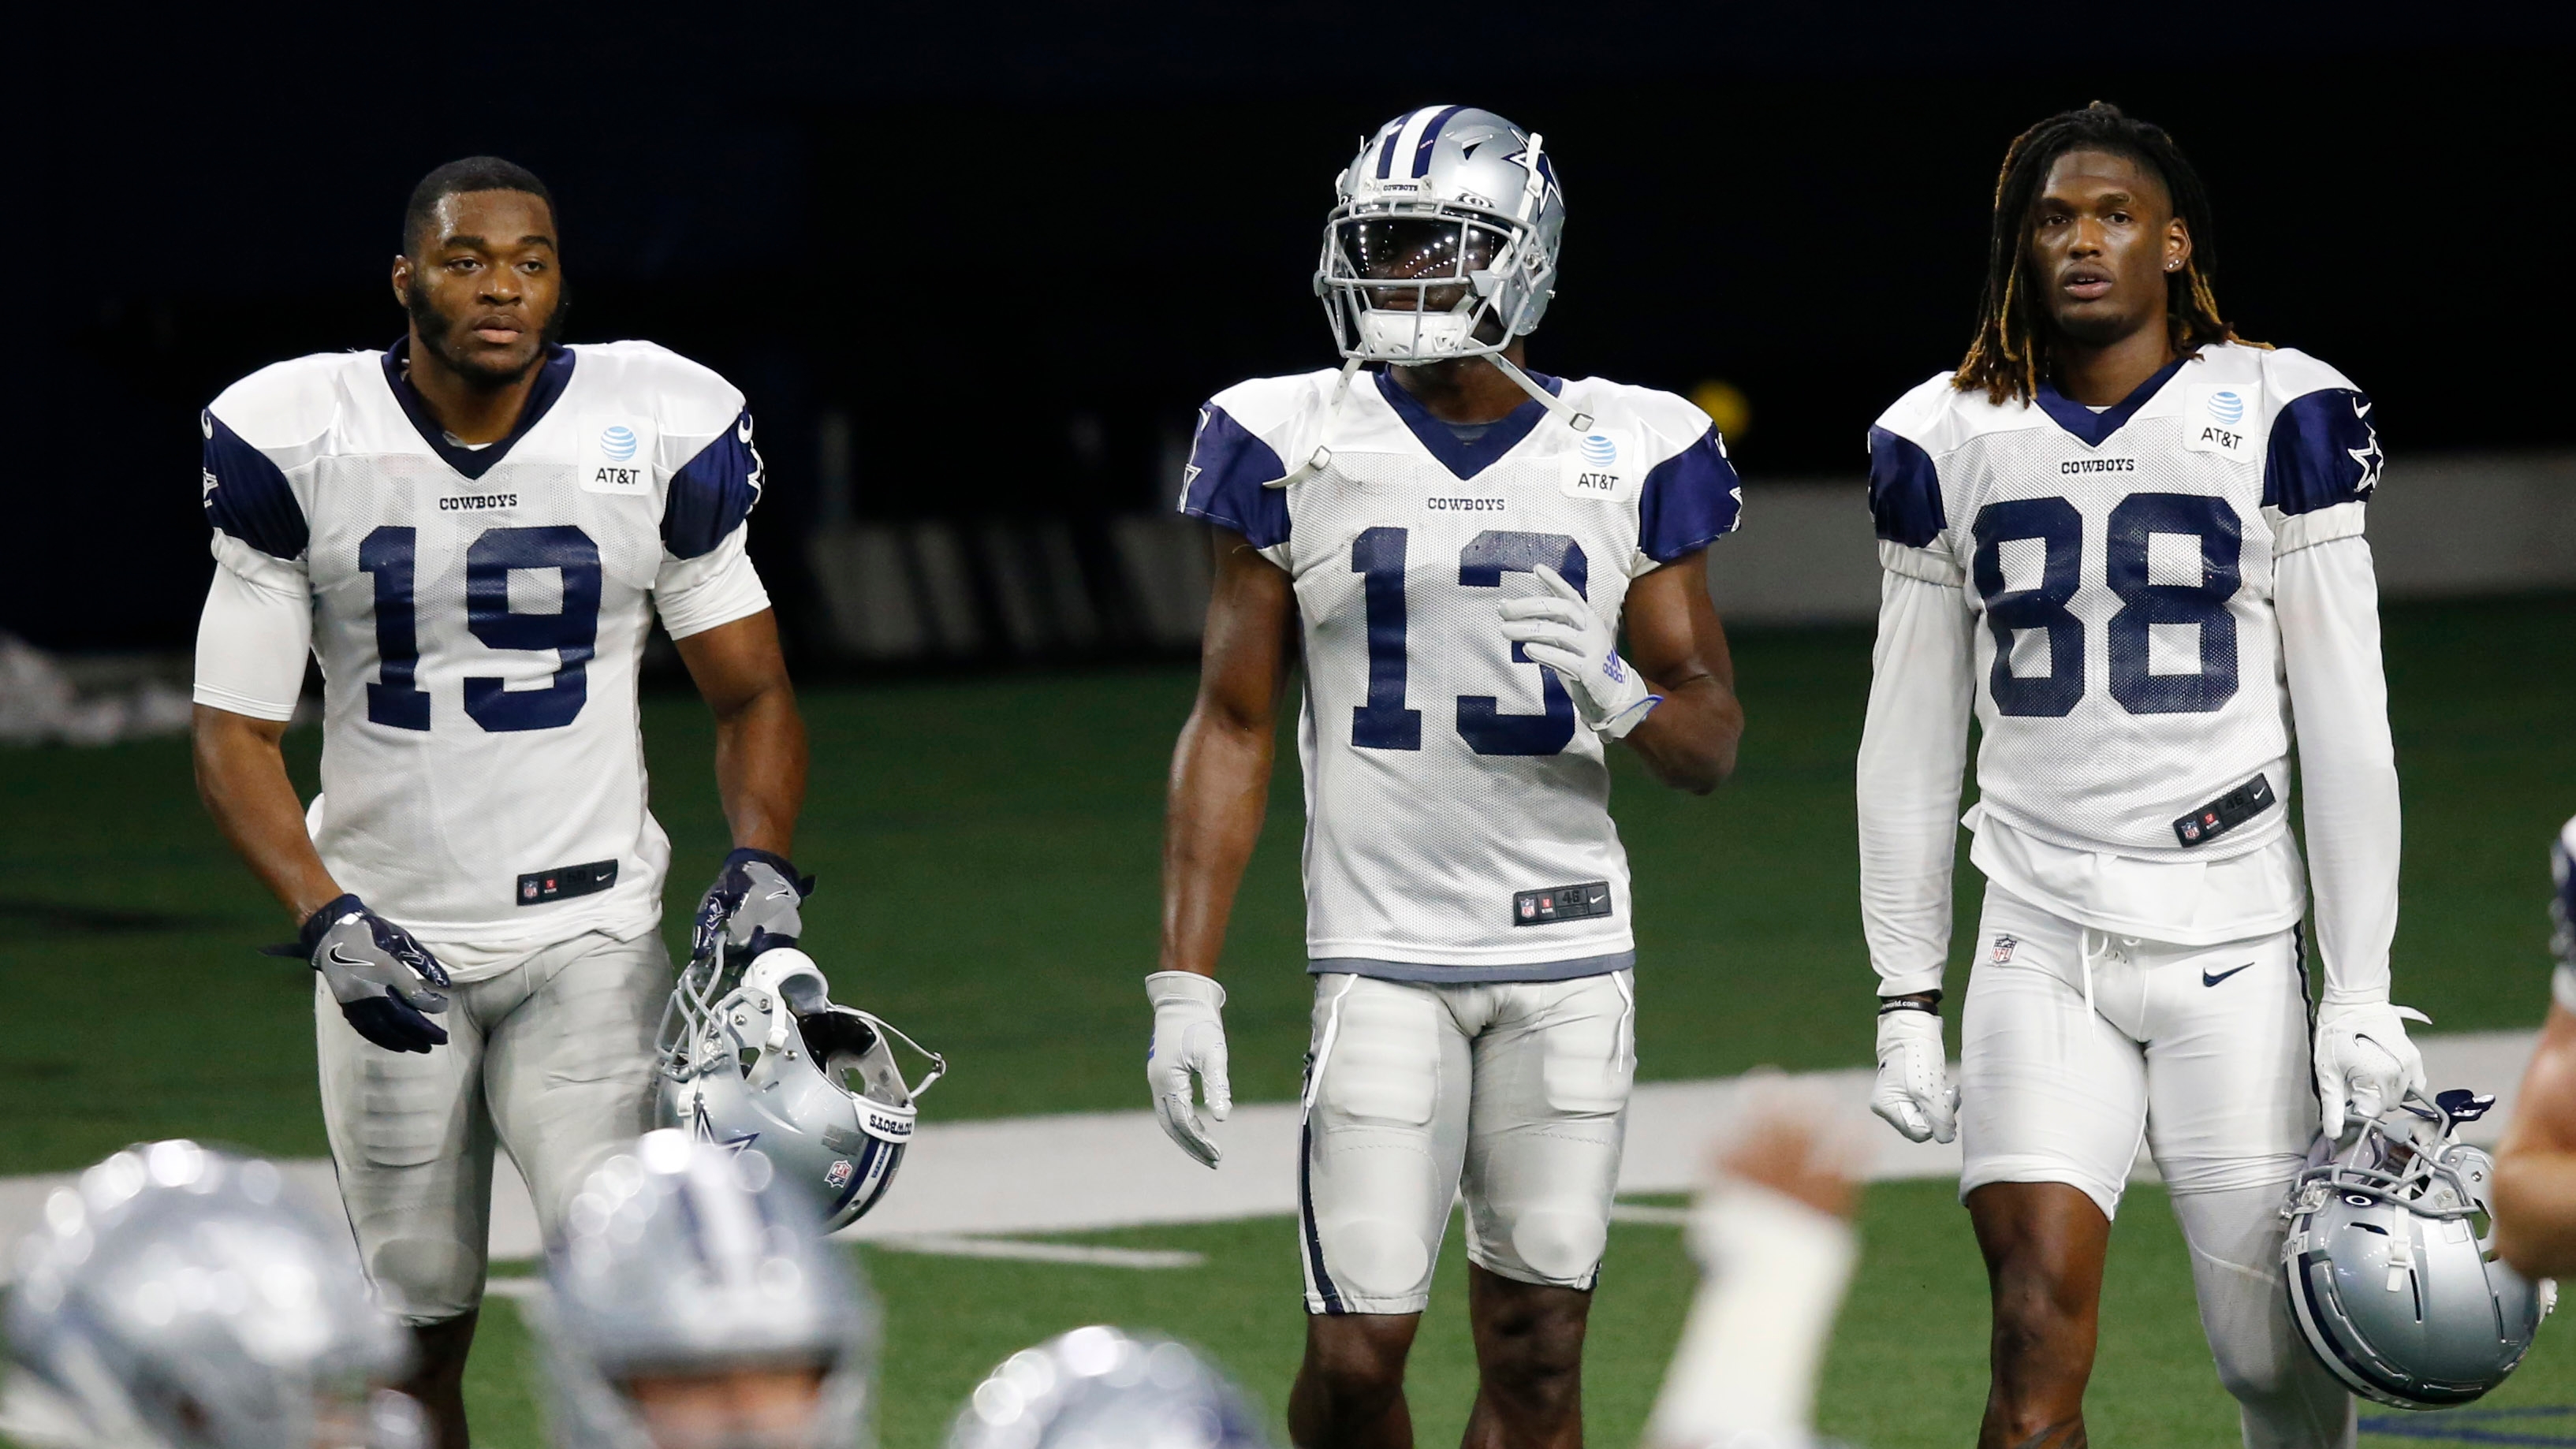 Amari Cooper may be odd man out in Cowboys' WR schism